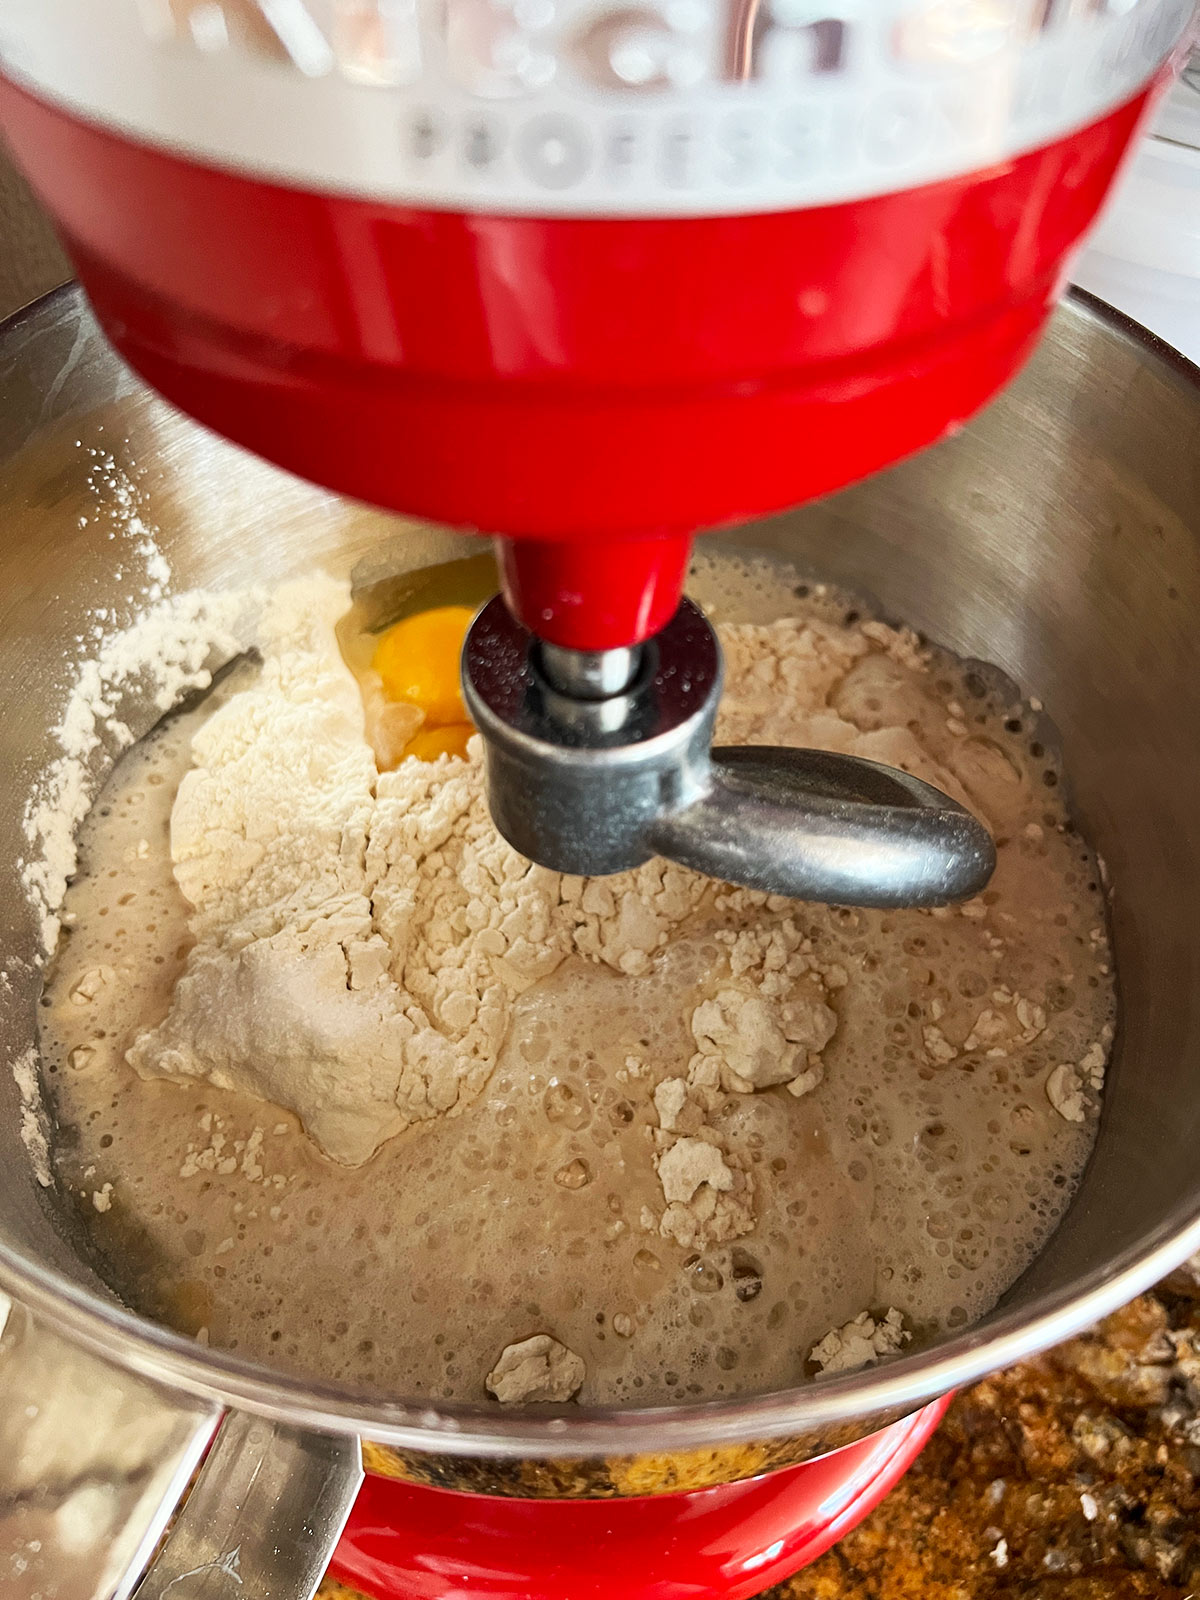 Challah ingredients in the large bowl of a red stand mixer with the dough hook attached.